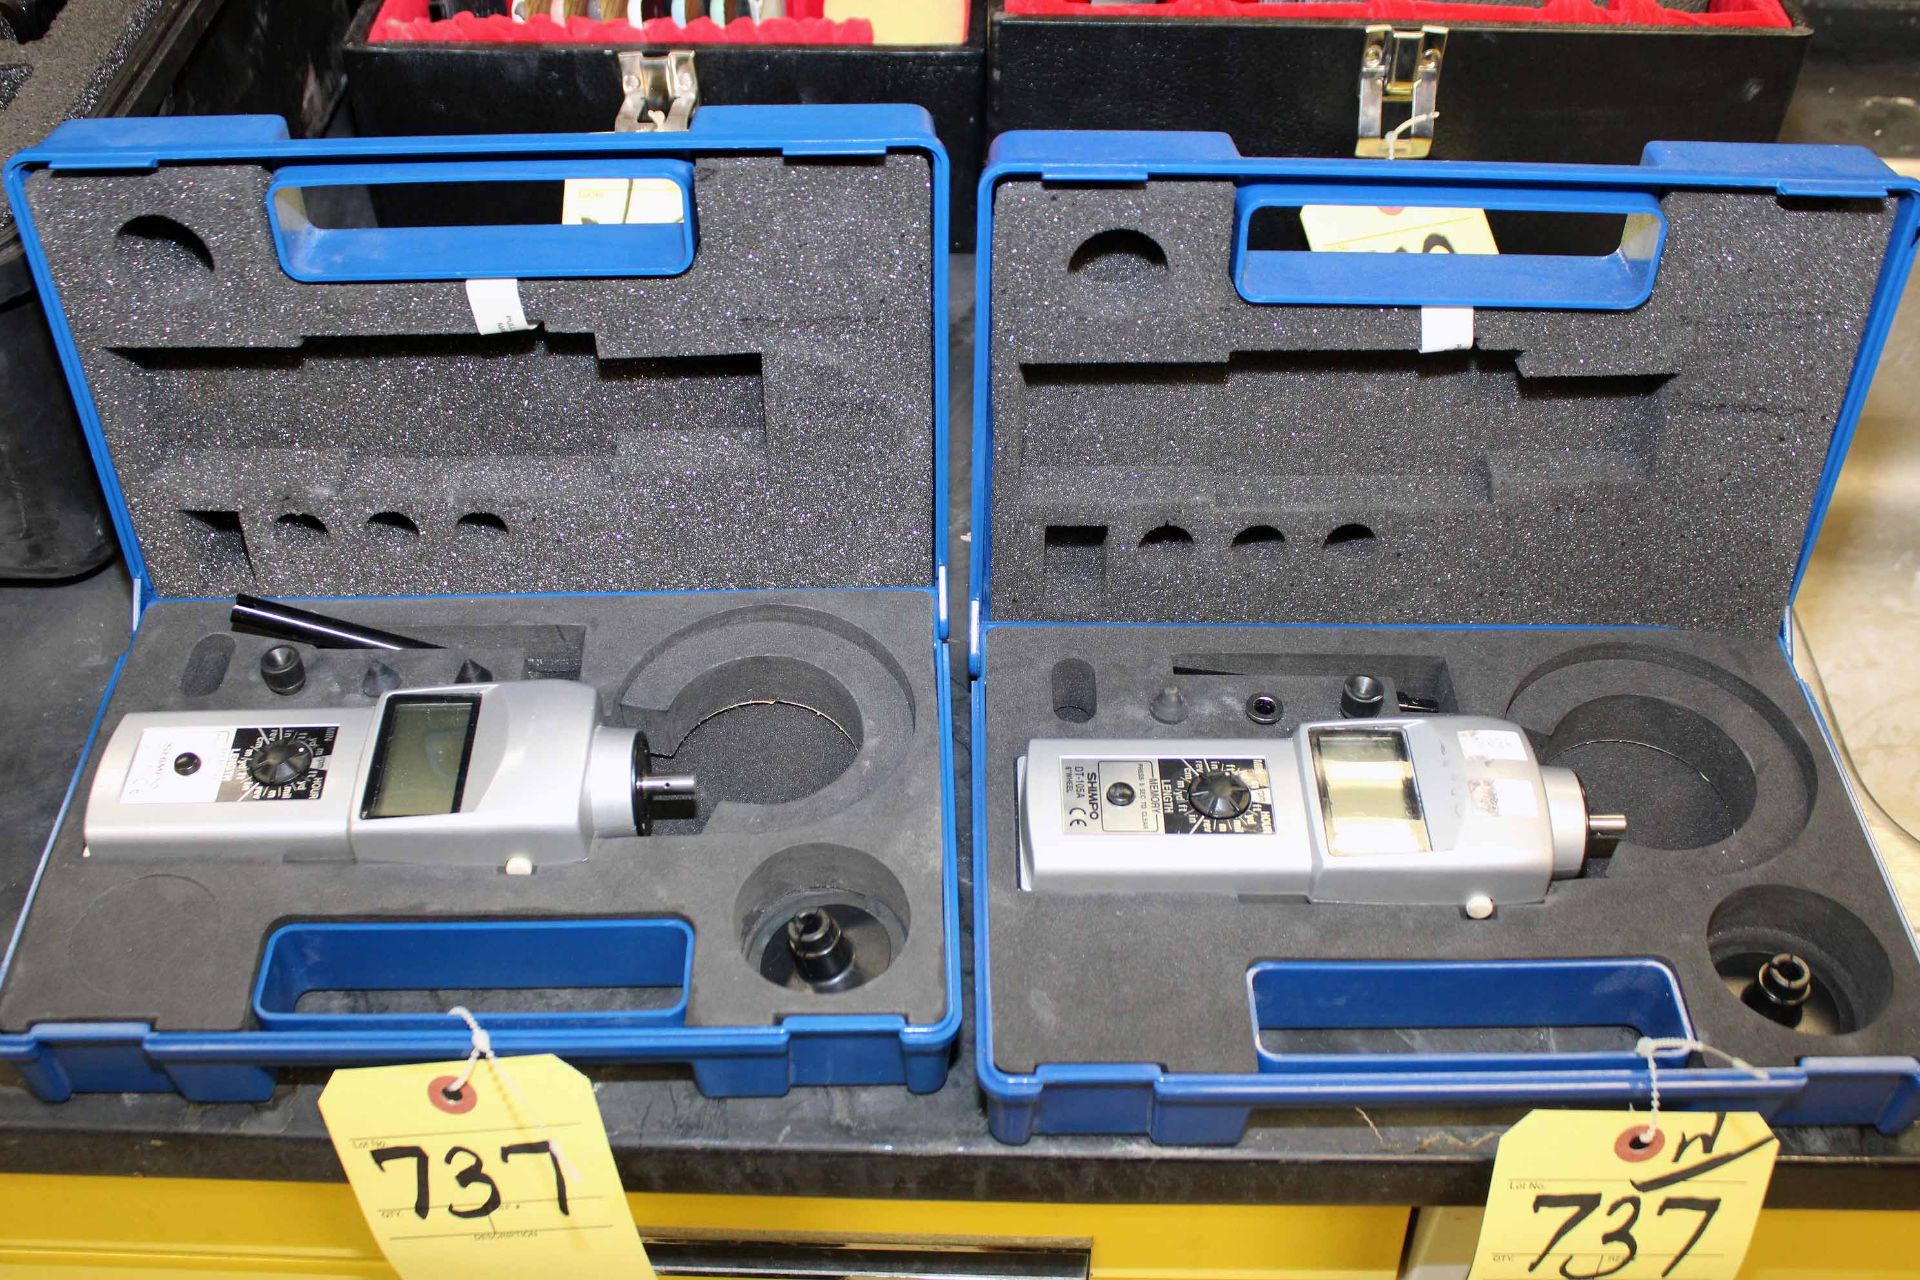 LOT OF CONTACT DIGITAL TACHOMETERS (2), SHIMPO MDL. DT-105A, w/cases, S/N A05AB0096 & S/N A56B0038